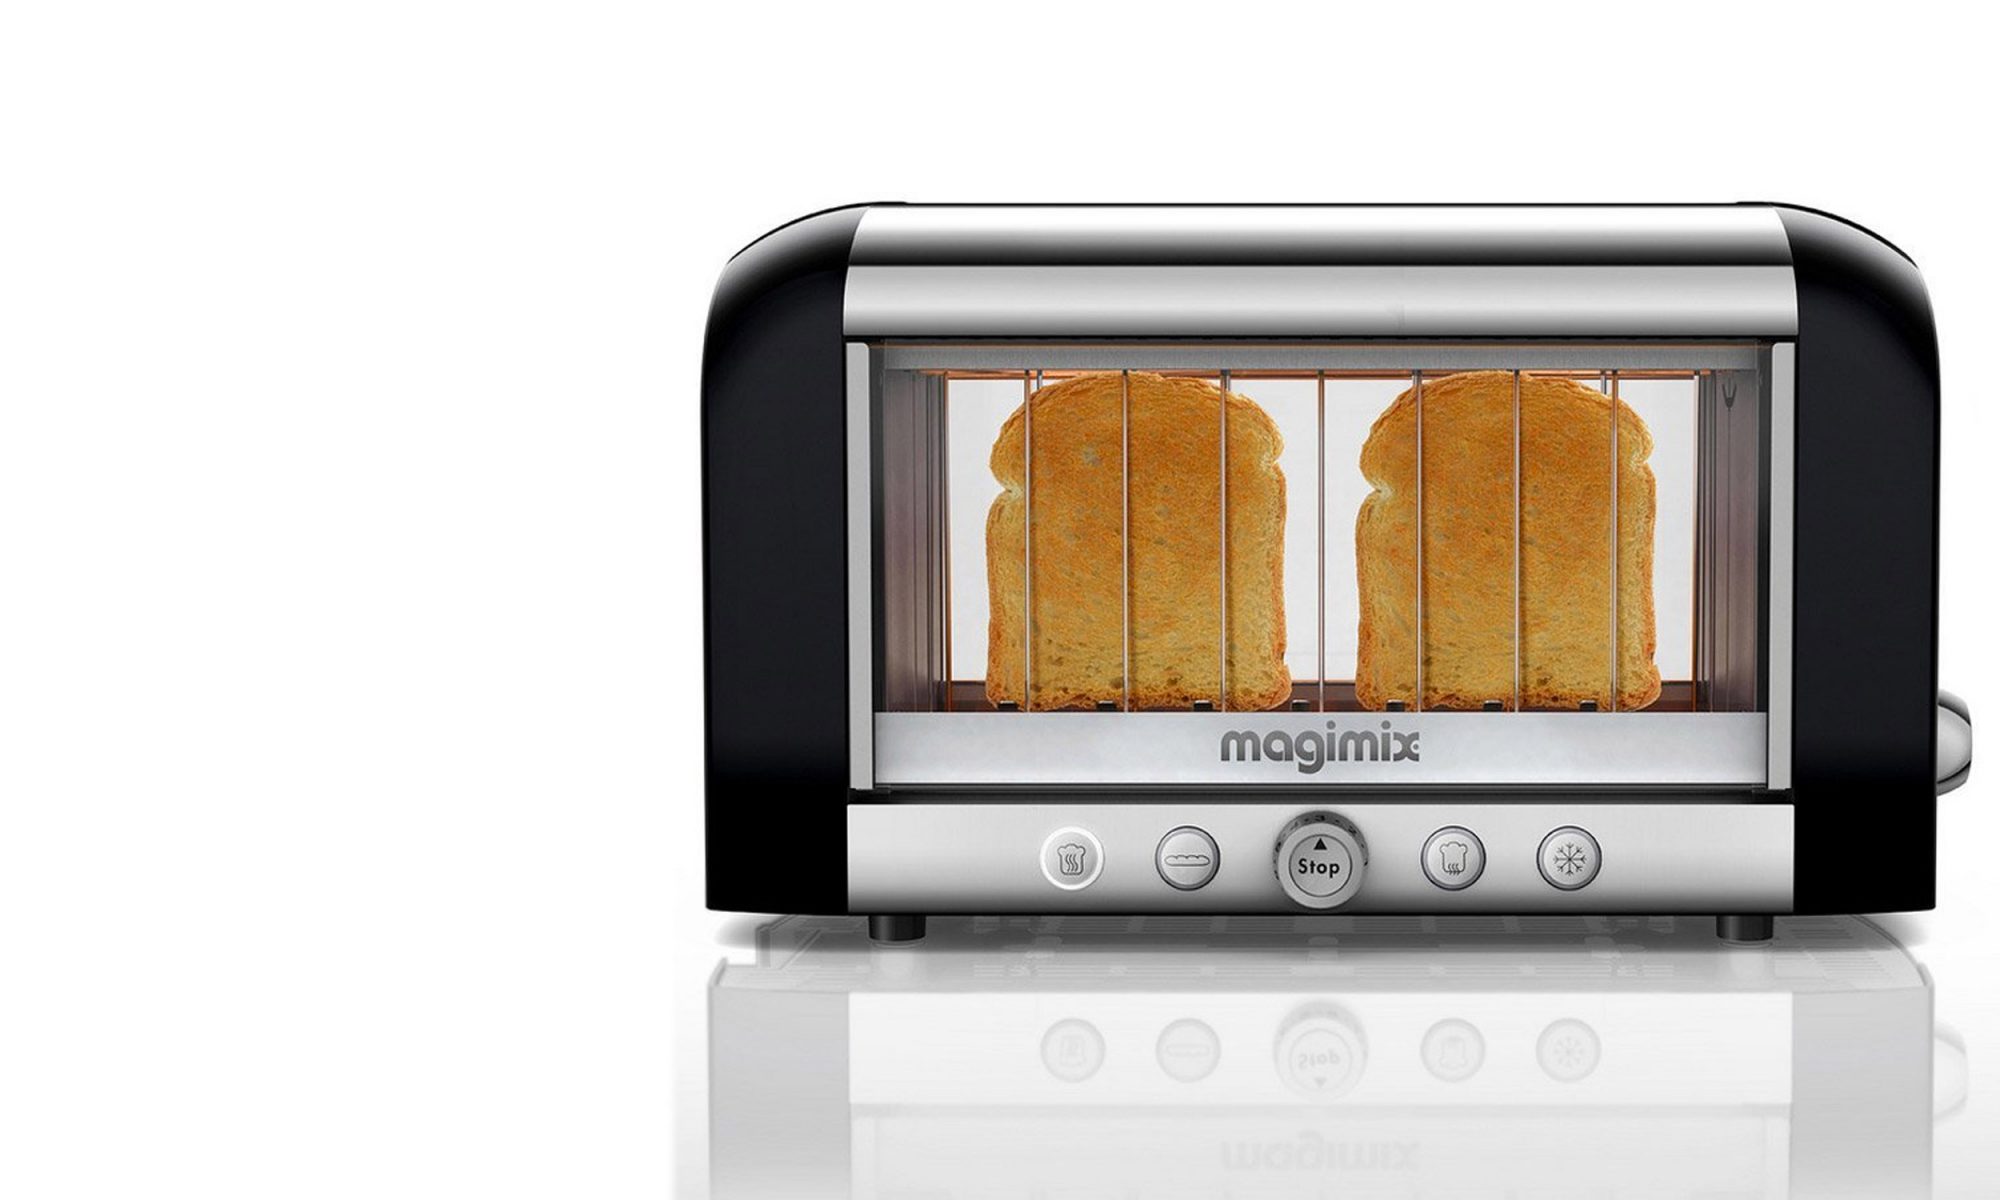 EC: This Glass Toaster Lets You Make Perfect Toast Every Time